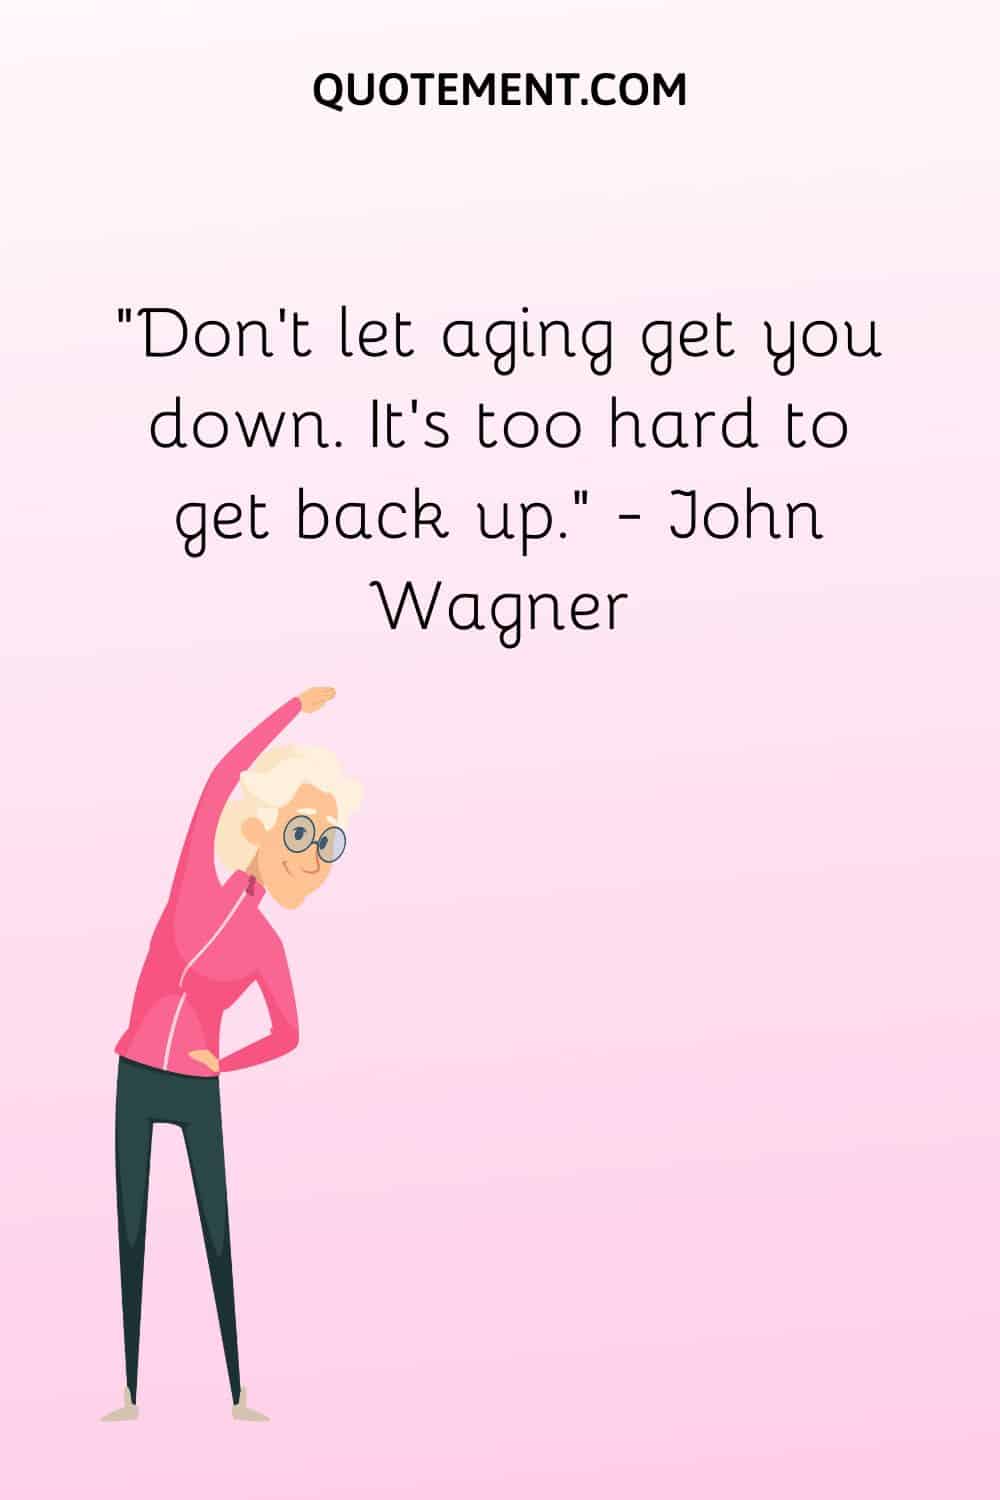 Don’t let aging get you down. It’s too hard to get back up